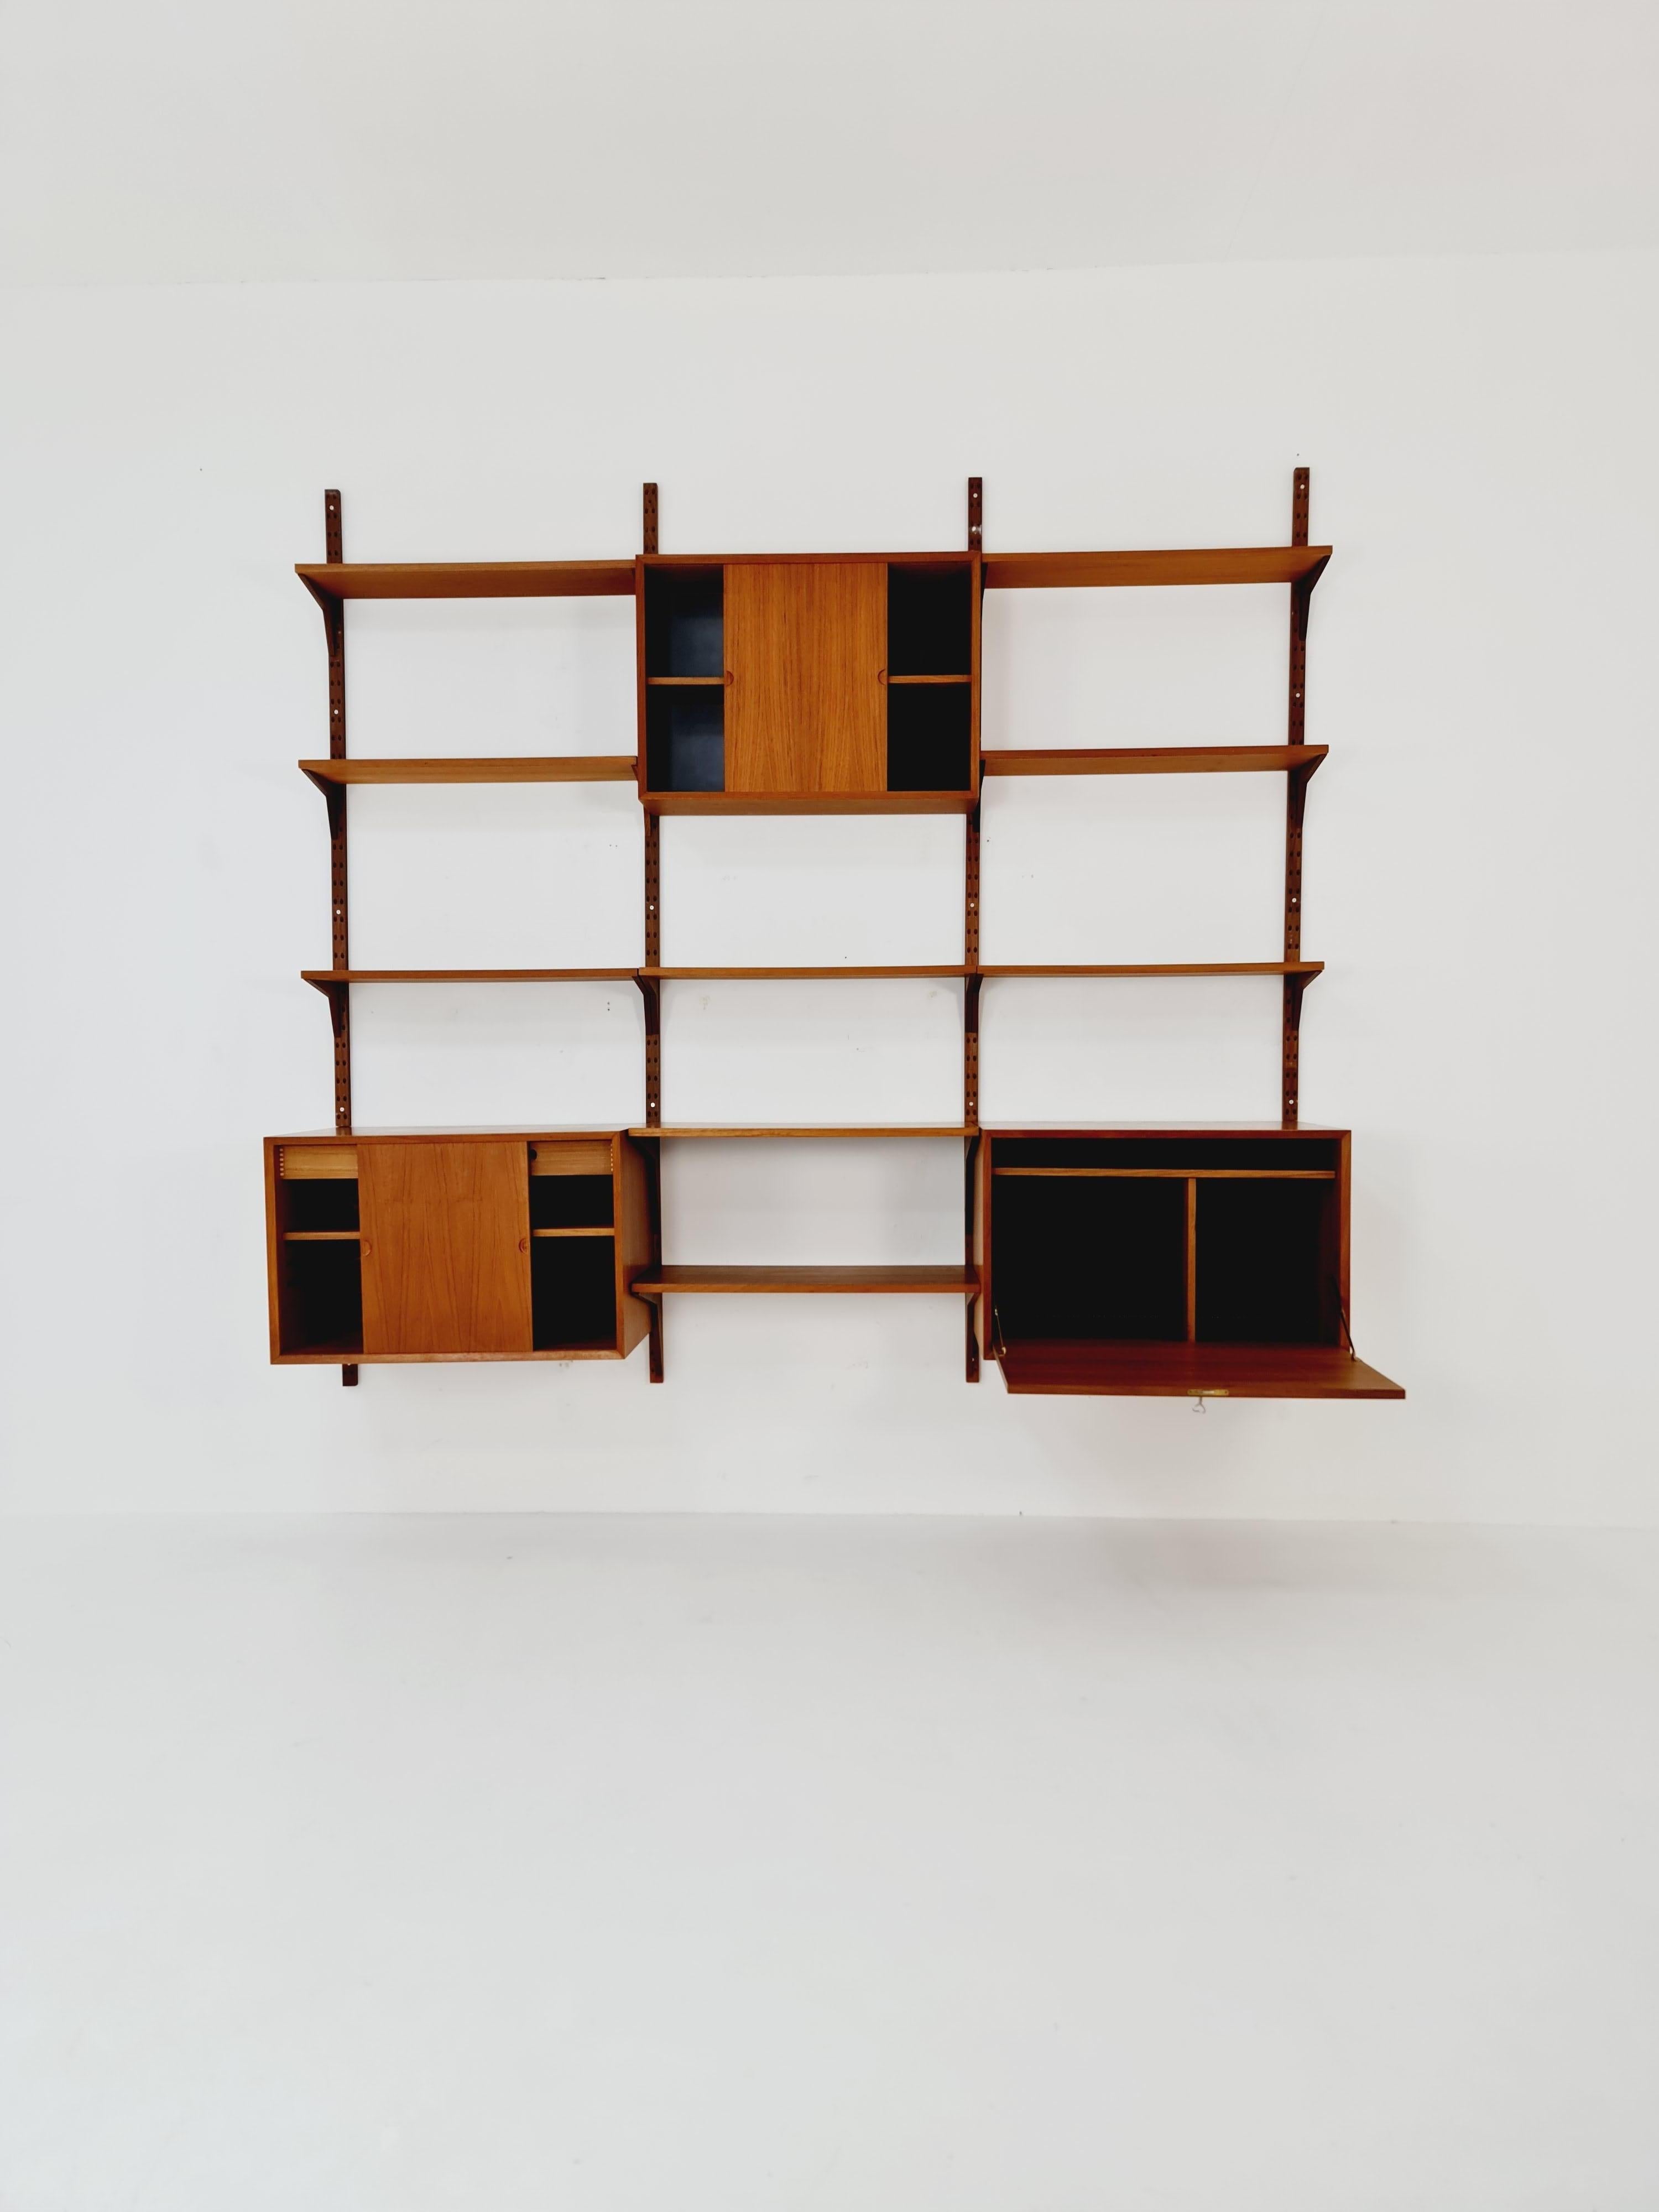 Big Mid century Danish Teak Wall Unit with 3 cabinets & Record cabient  by Poul Cadovius for Cado, Denmark, 1960s

Danish design by Poul Cadovius

Design year: 1960s

Dimensions: :  46 D x 240 W x 224  H cm 

It is in mint condition, however, as